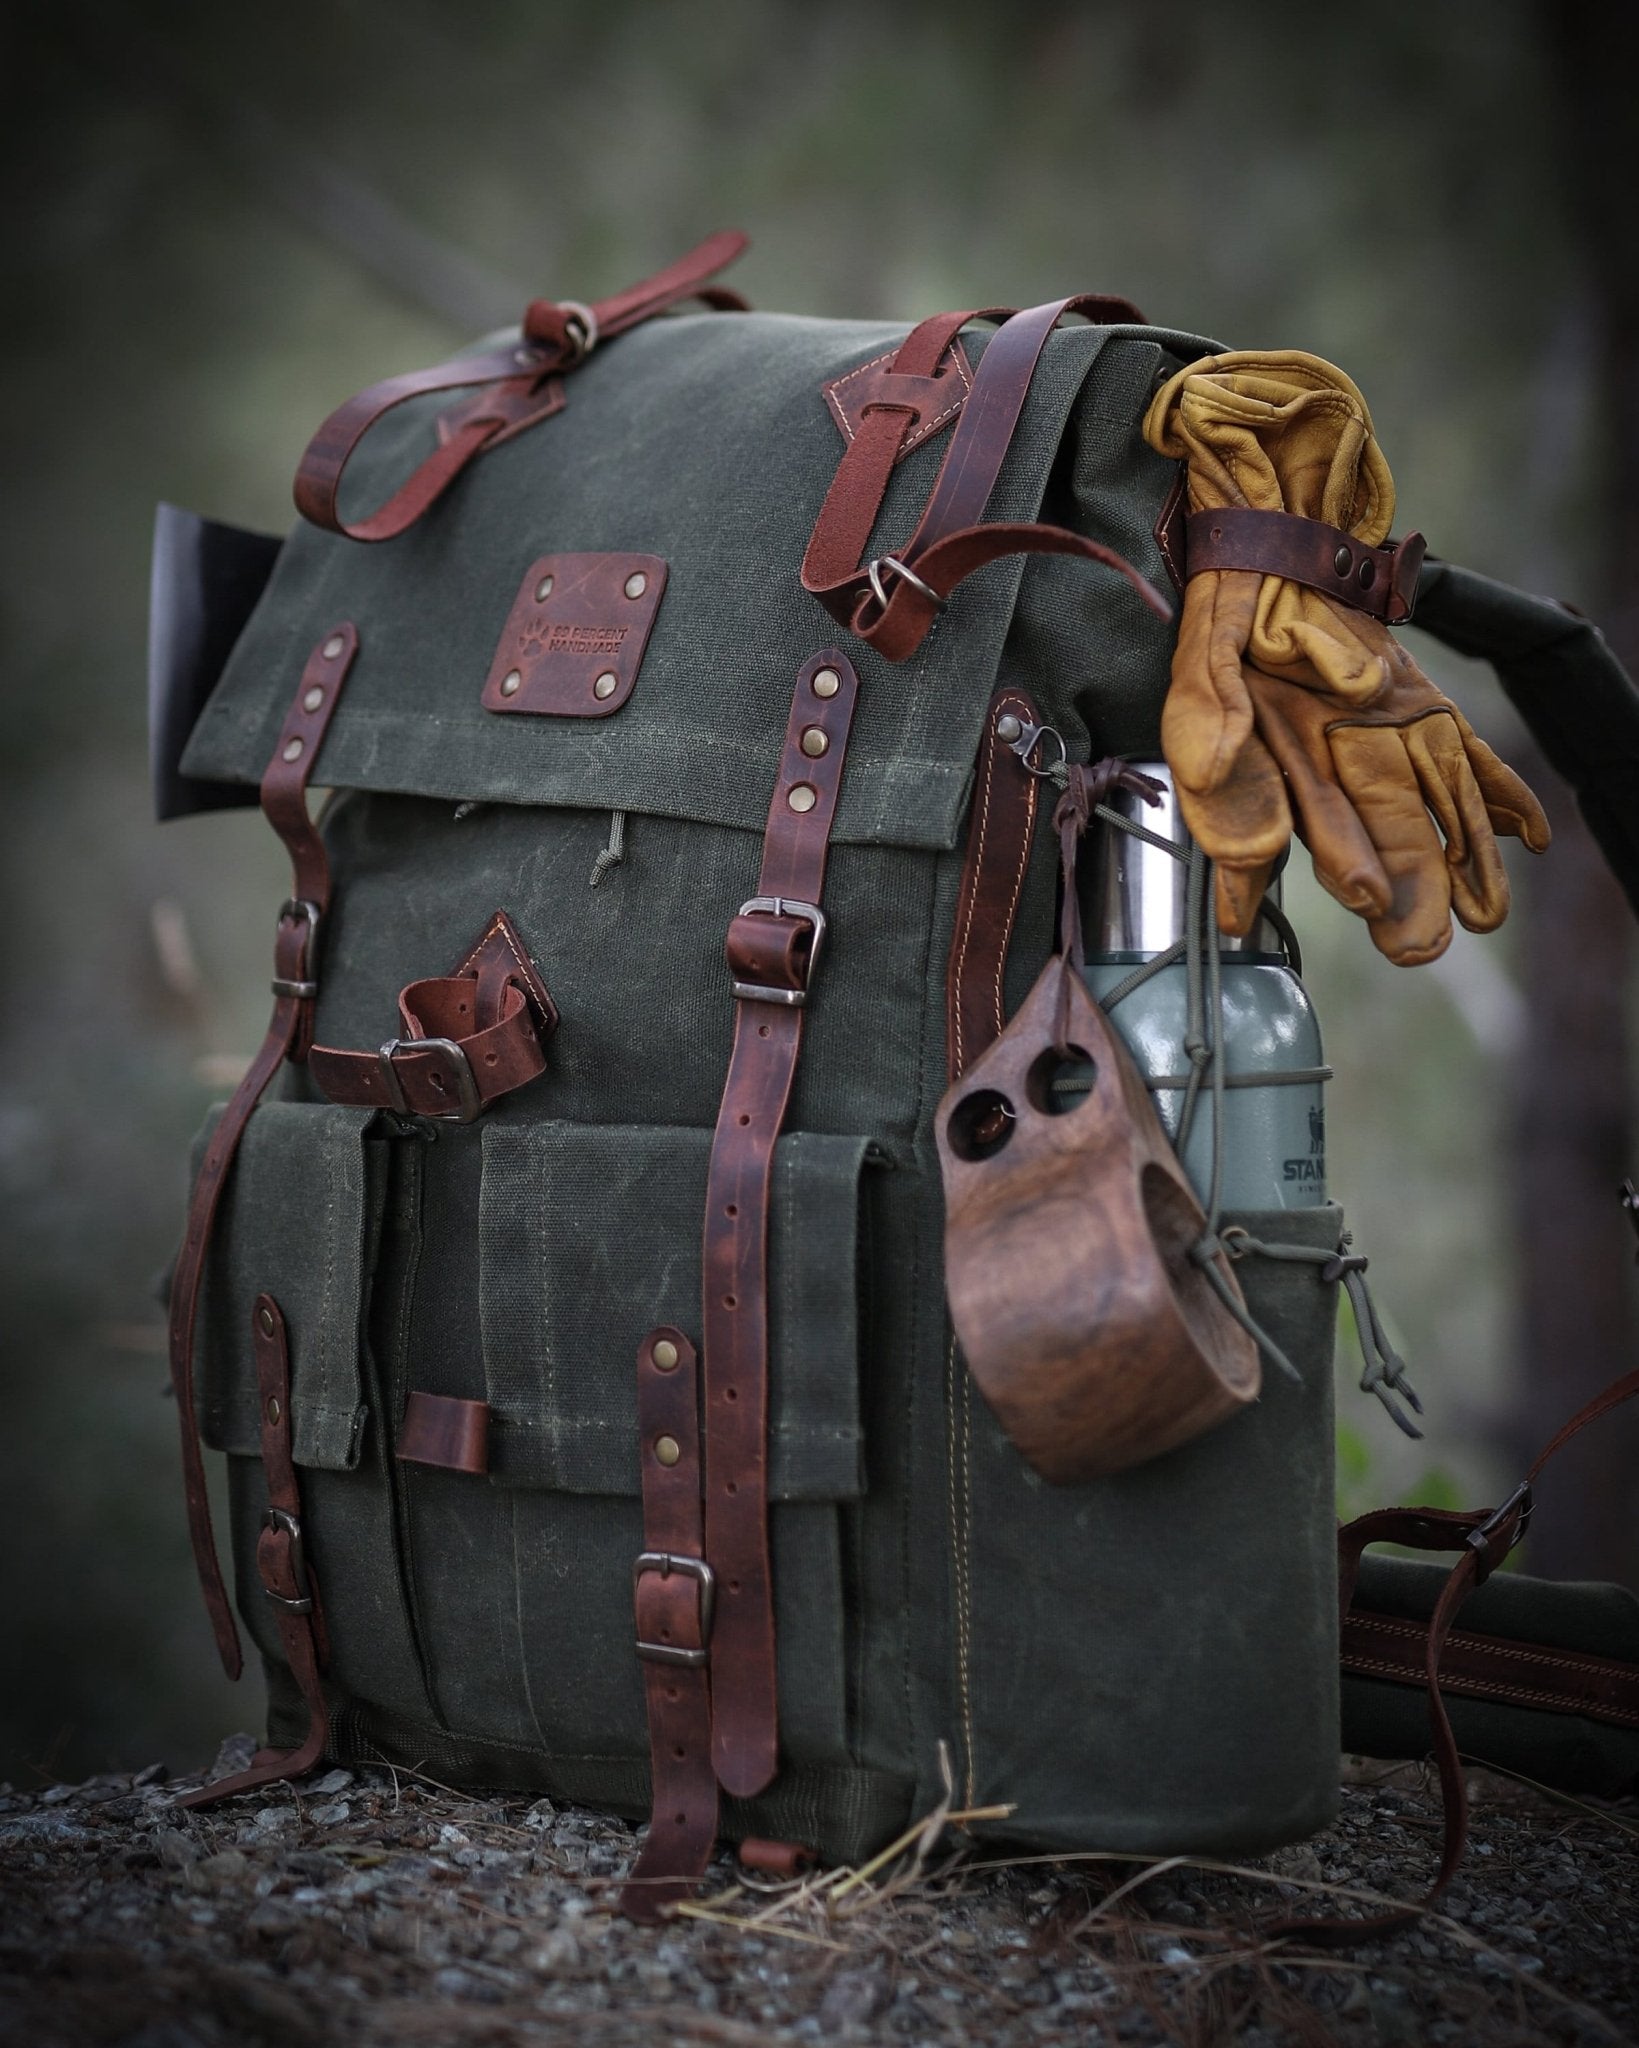 30L to 80L | Green, Brown, Dhaki | Camping Backpack | Buschraft Backpack | Handmade Leather, Canvas Backpack for Travel, Camping, Bushcraft  99percenthandmade   